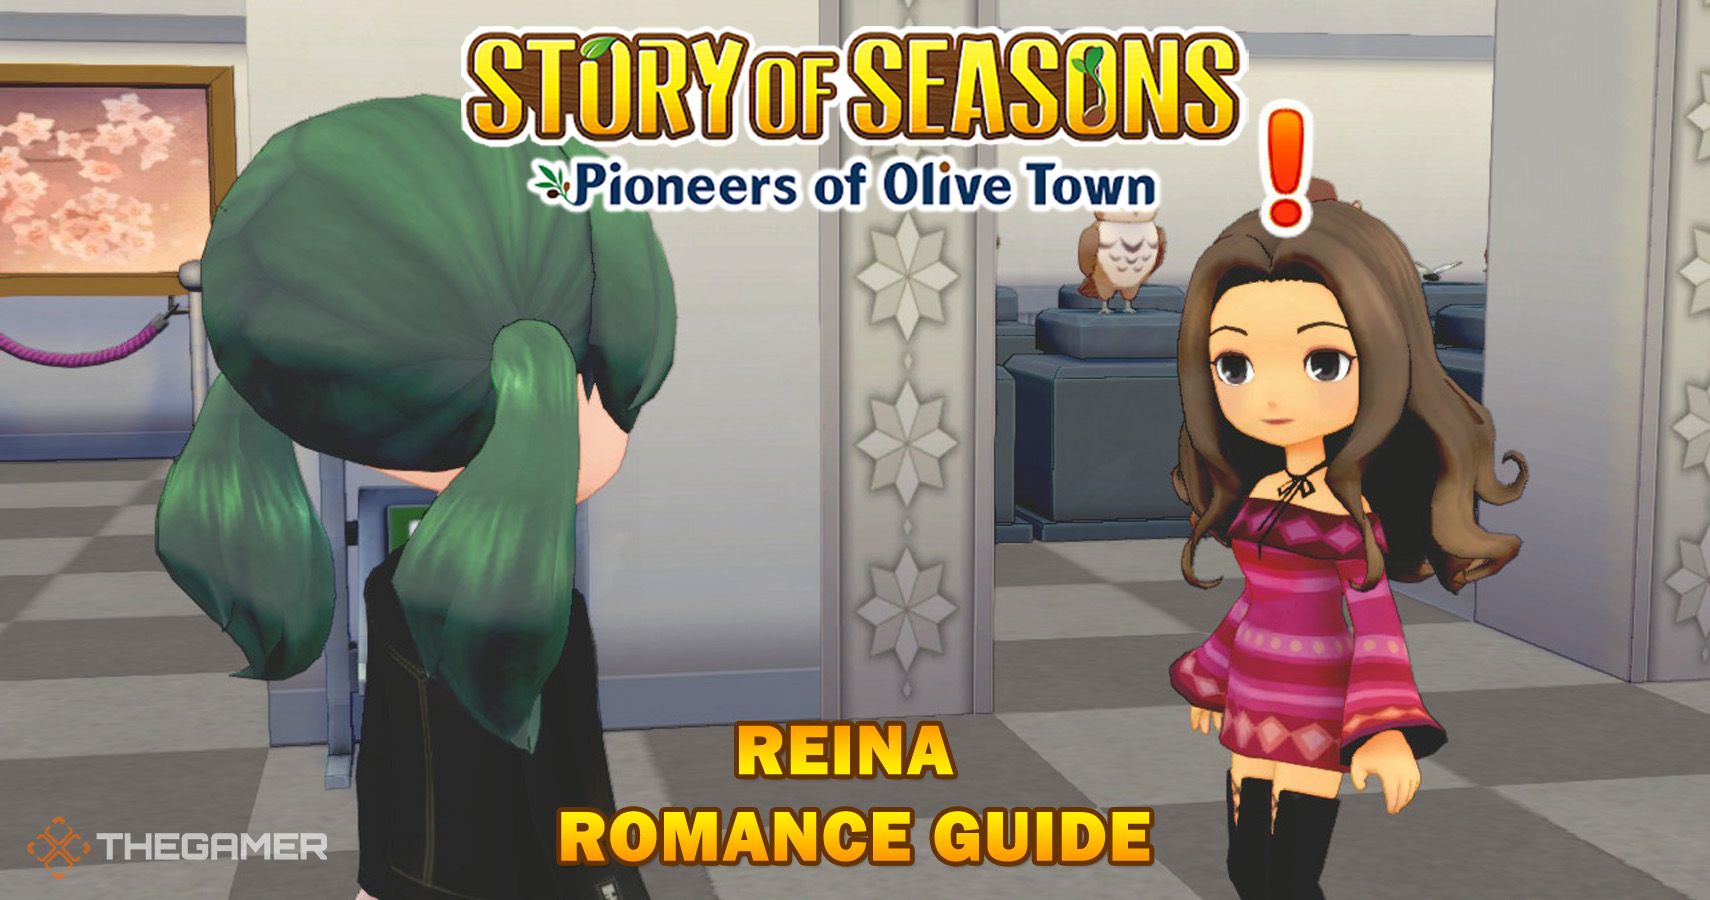 sold girl town guide